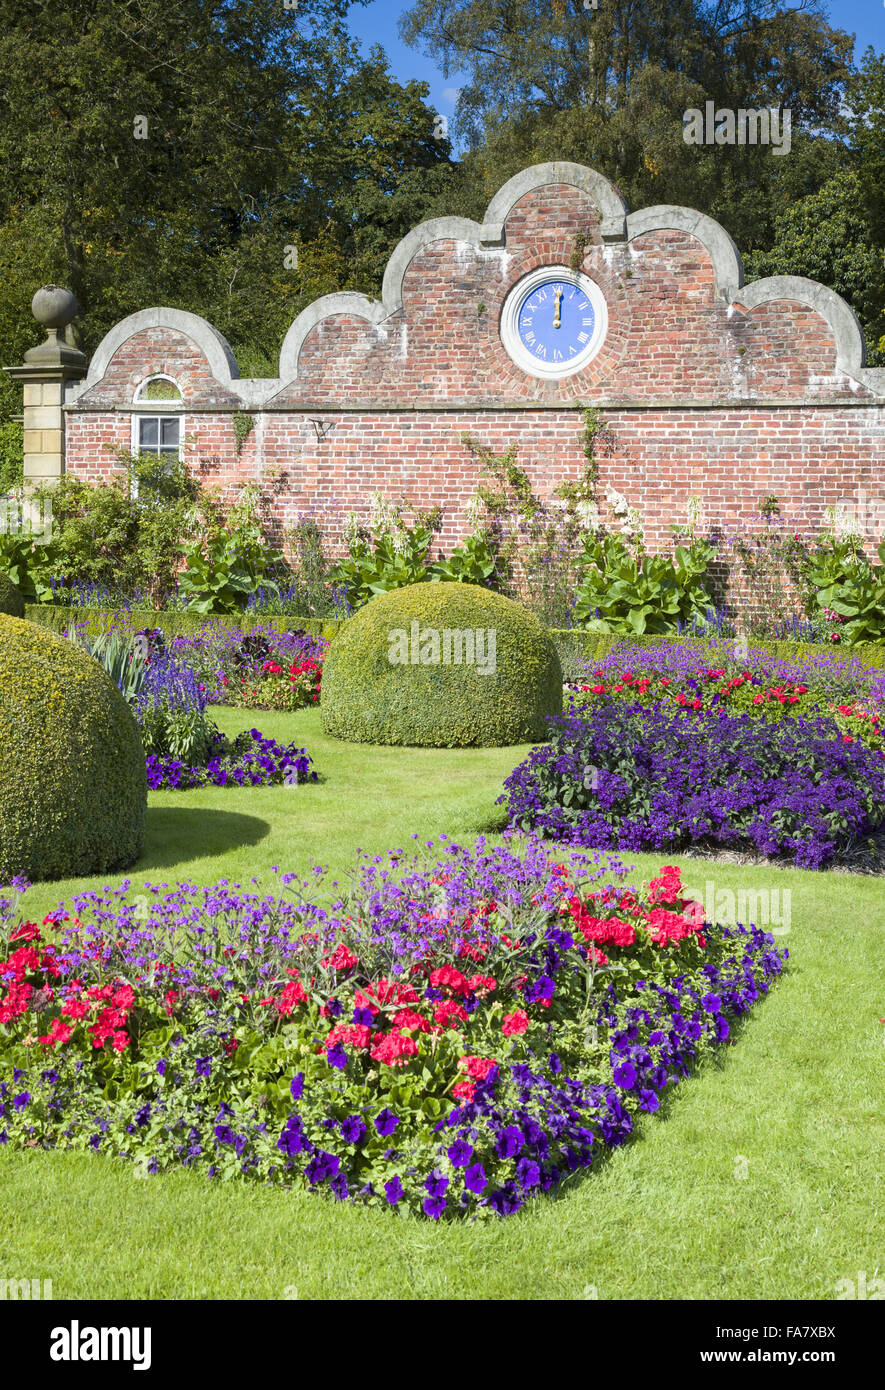 The Victorian parterre at Erddig Hall.  Bedding plants include pelargoniums, verbena and petunias.  The clock was brought from Stansty Park and added to the wall in about 1912. Photographed September Stock Photo